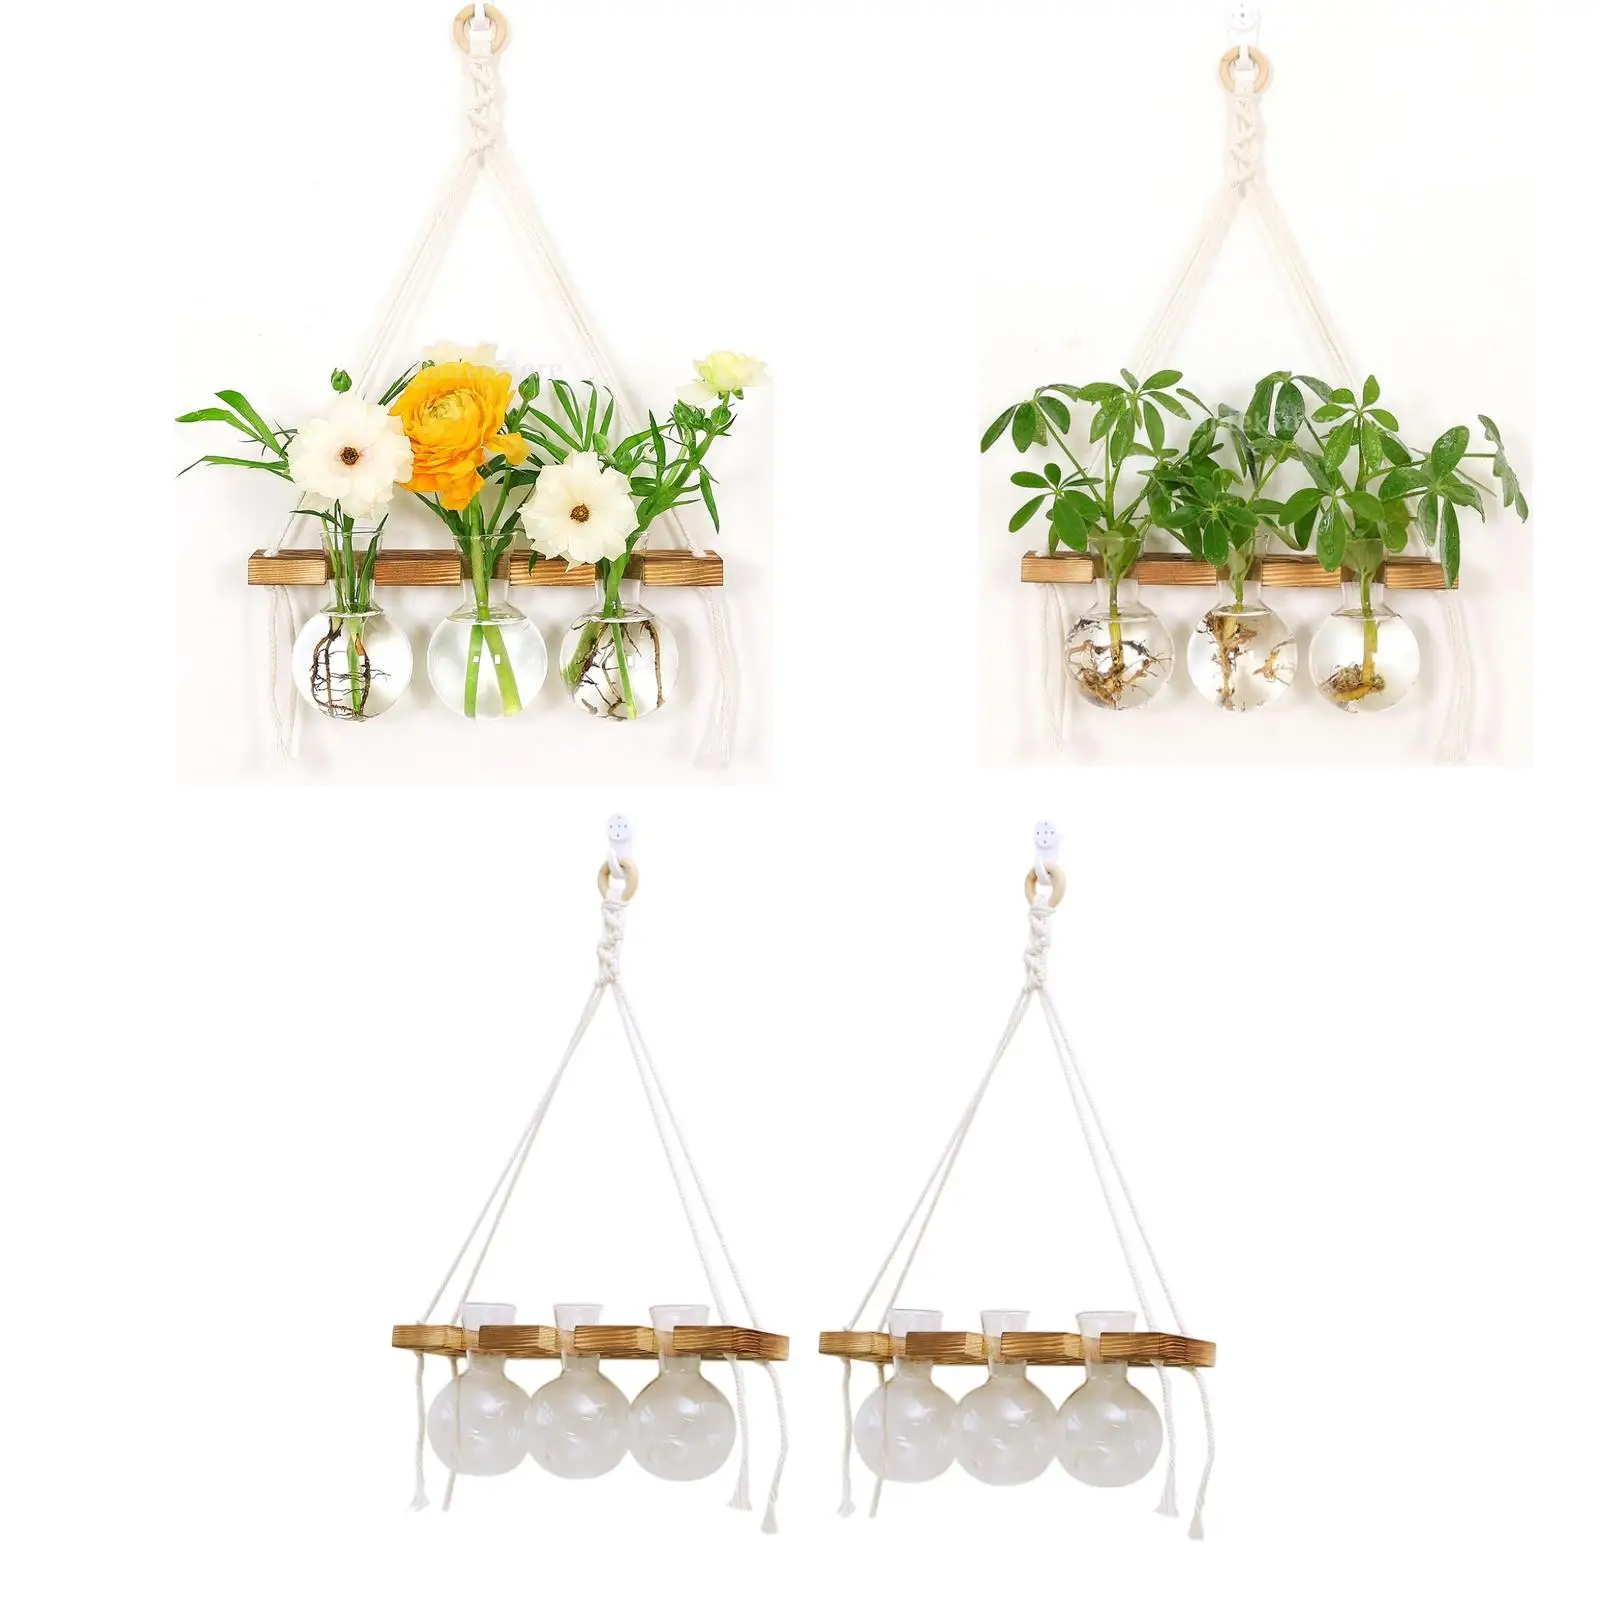 2x Wall Hanging Planter Terrarium for Plants Modern for Home Decor